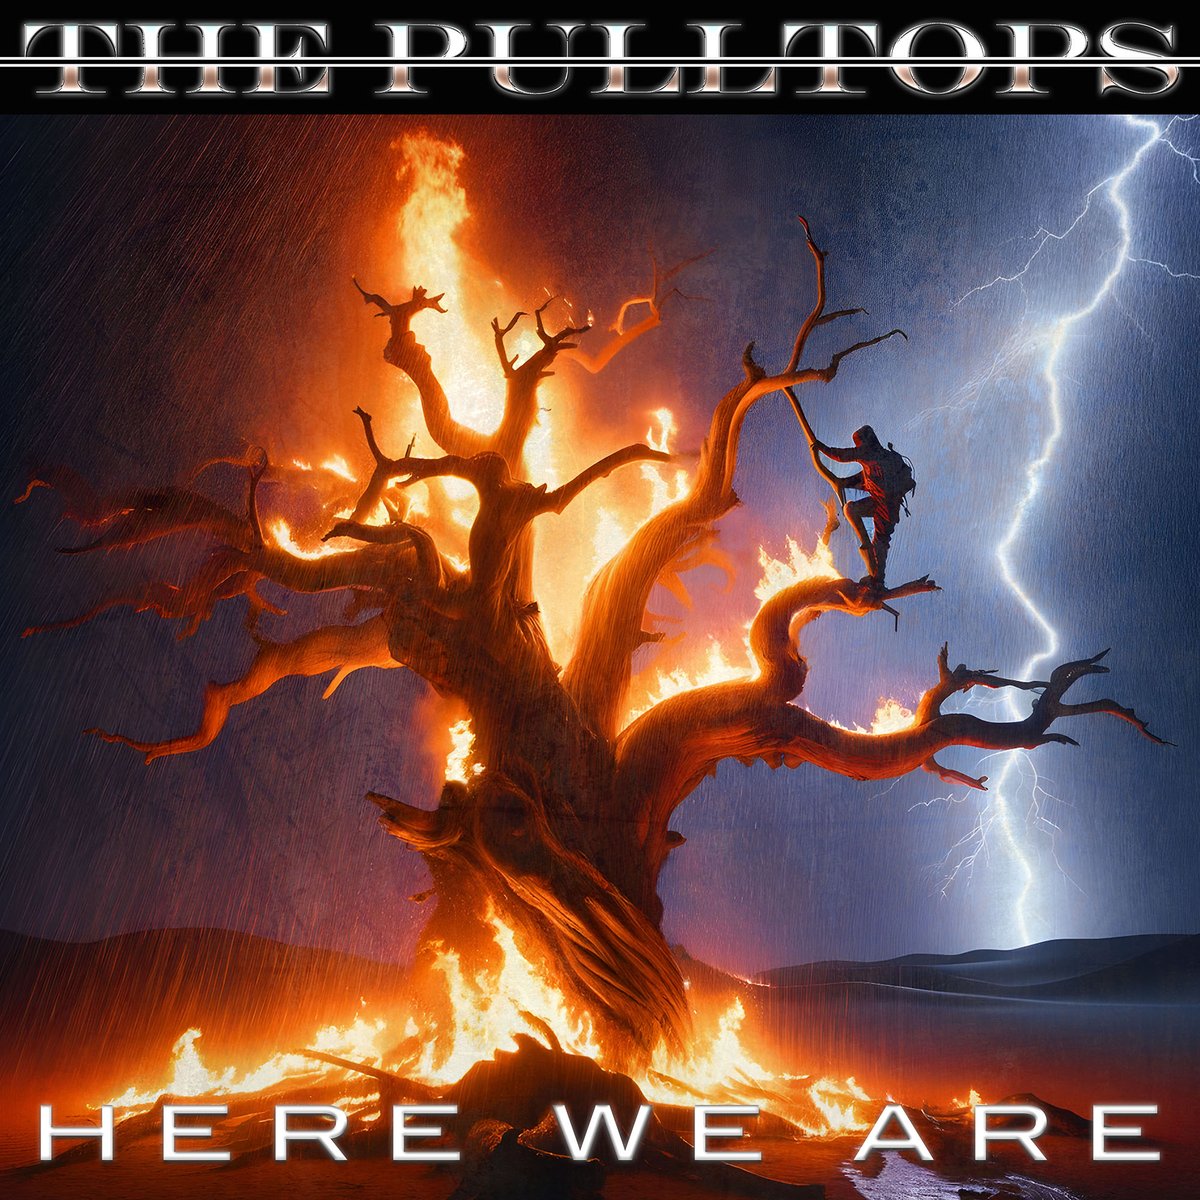 @pulltops – Here We Are

#indiedockmusicblog #poprock